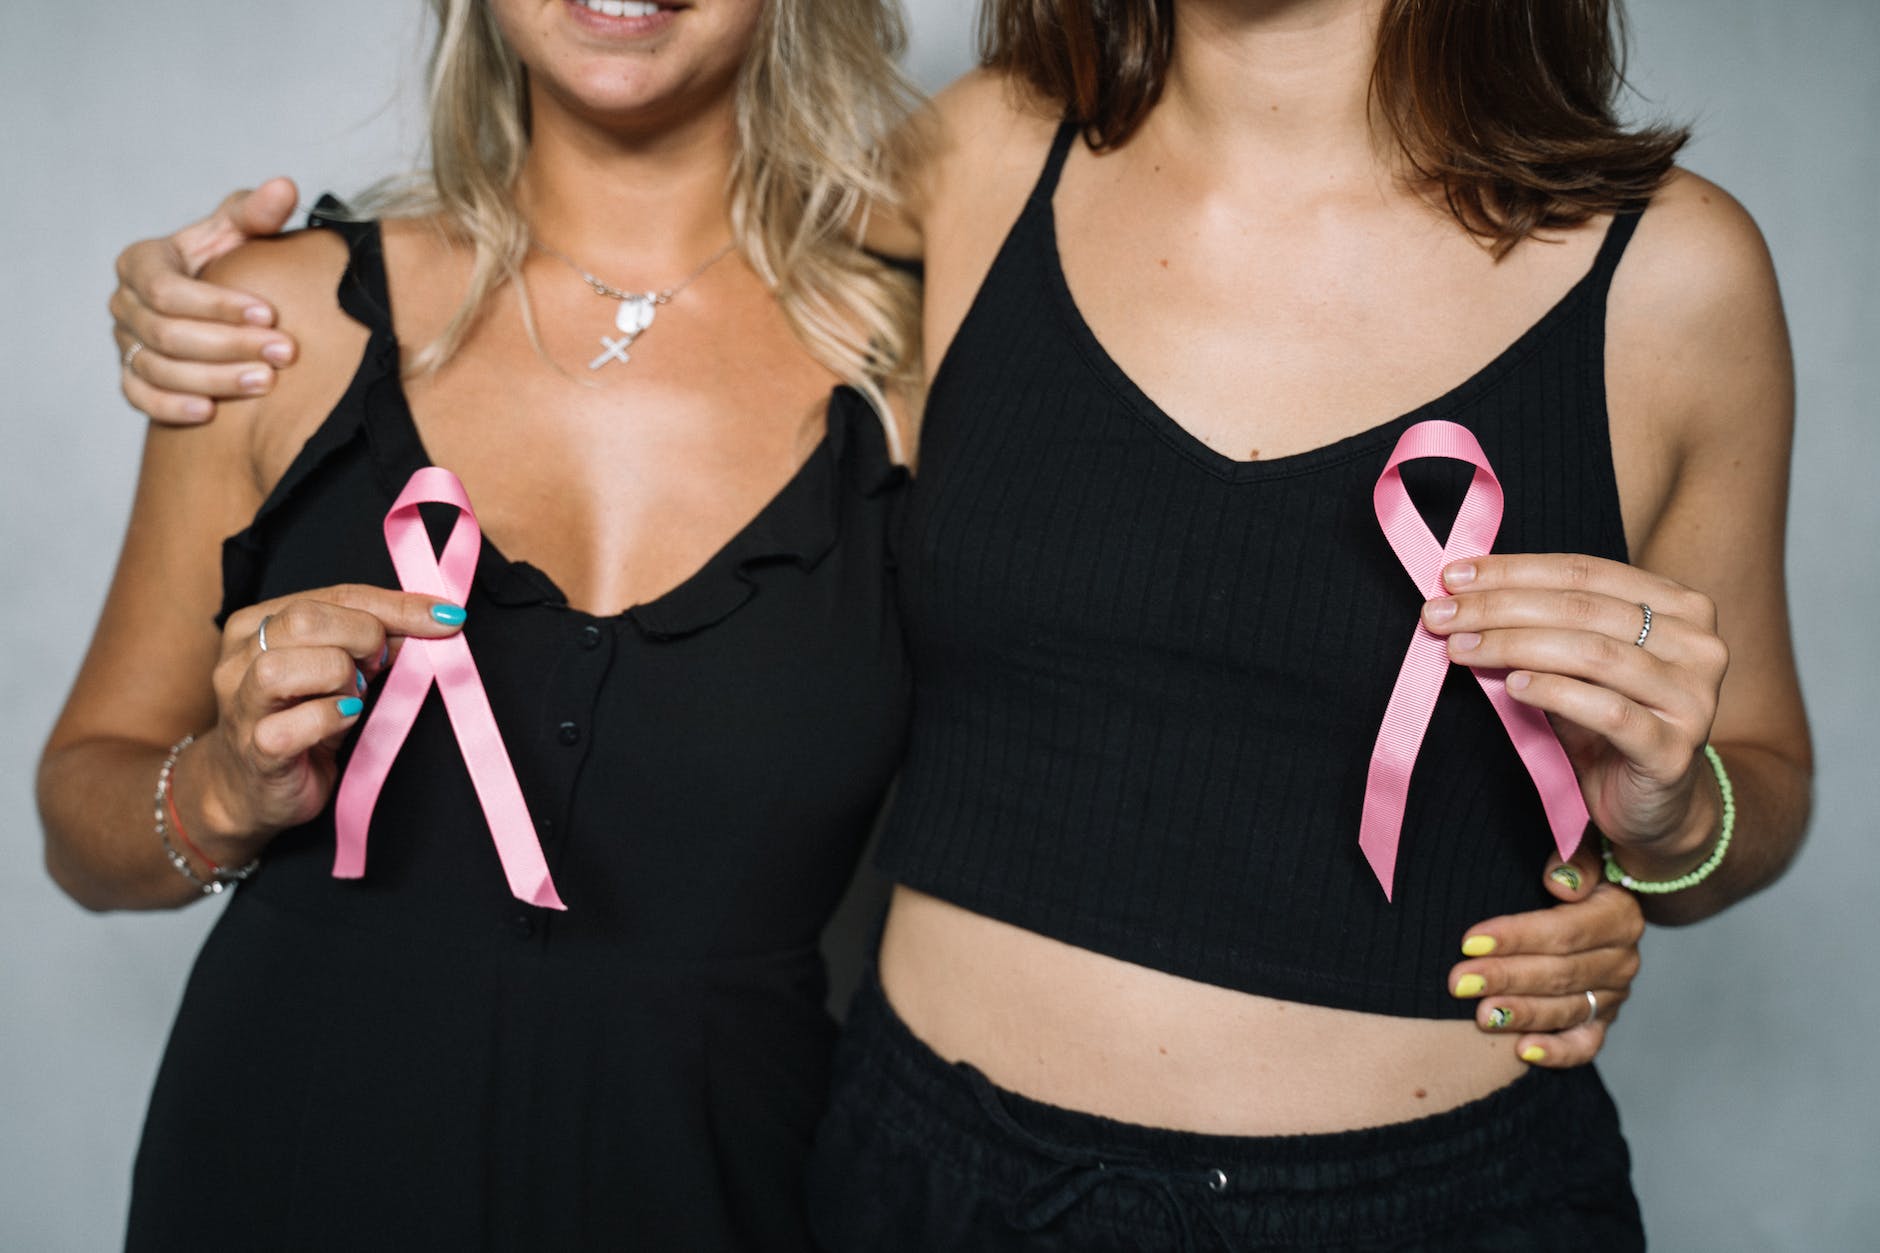 Empowerment Through Knowledge: Breast Cancer Prevention Tips
